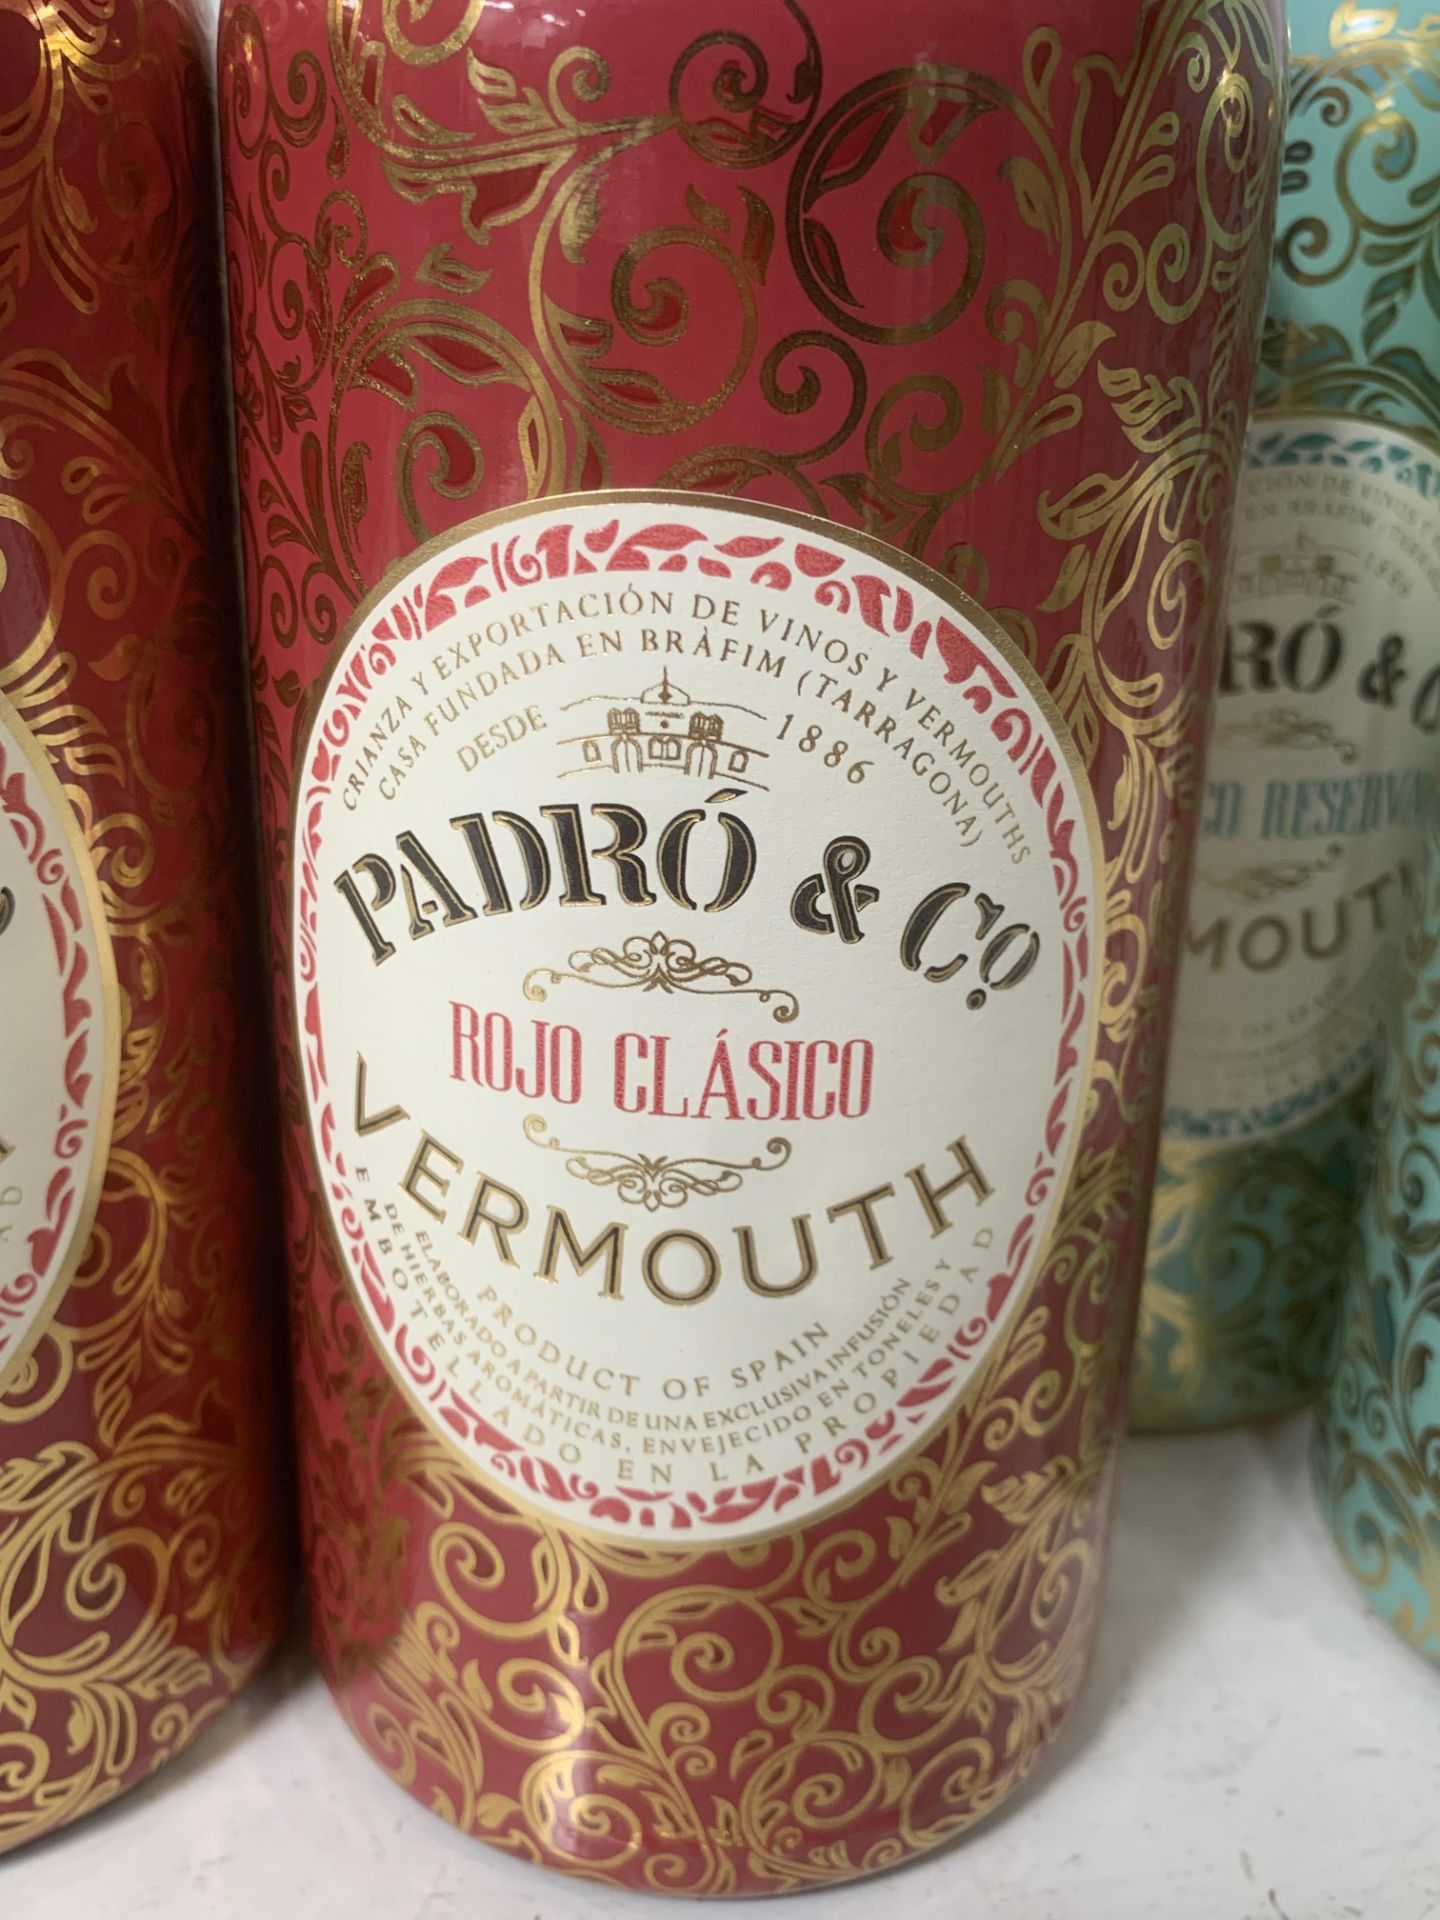 6x Padro & Co. Bottles of Vermouth; 4x Blanco Reserva 18%, 75cl and 2x Rojo Clasico 18%, 75cl - Image 2 of 5